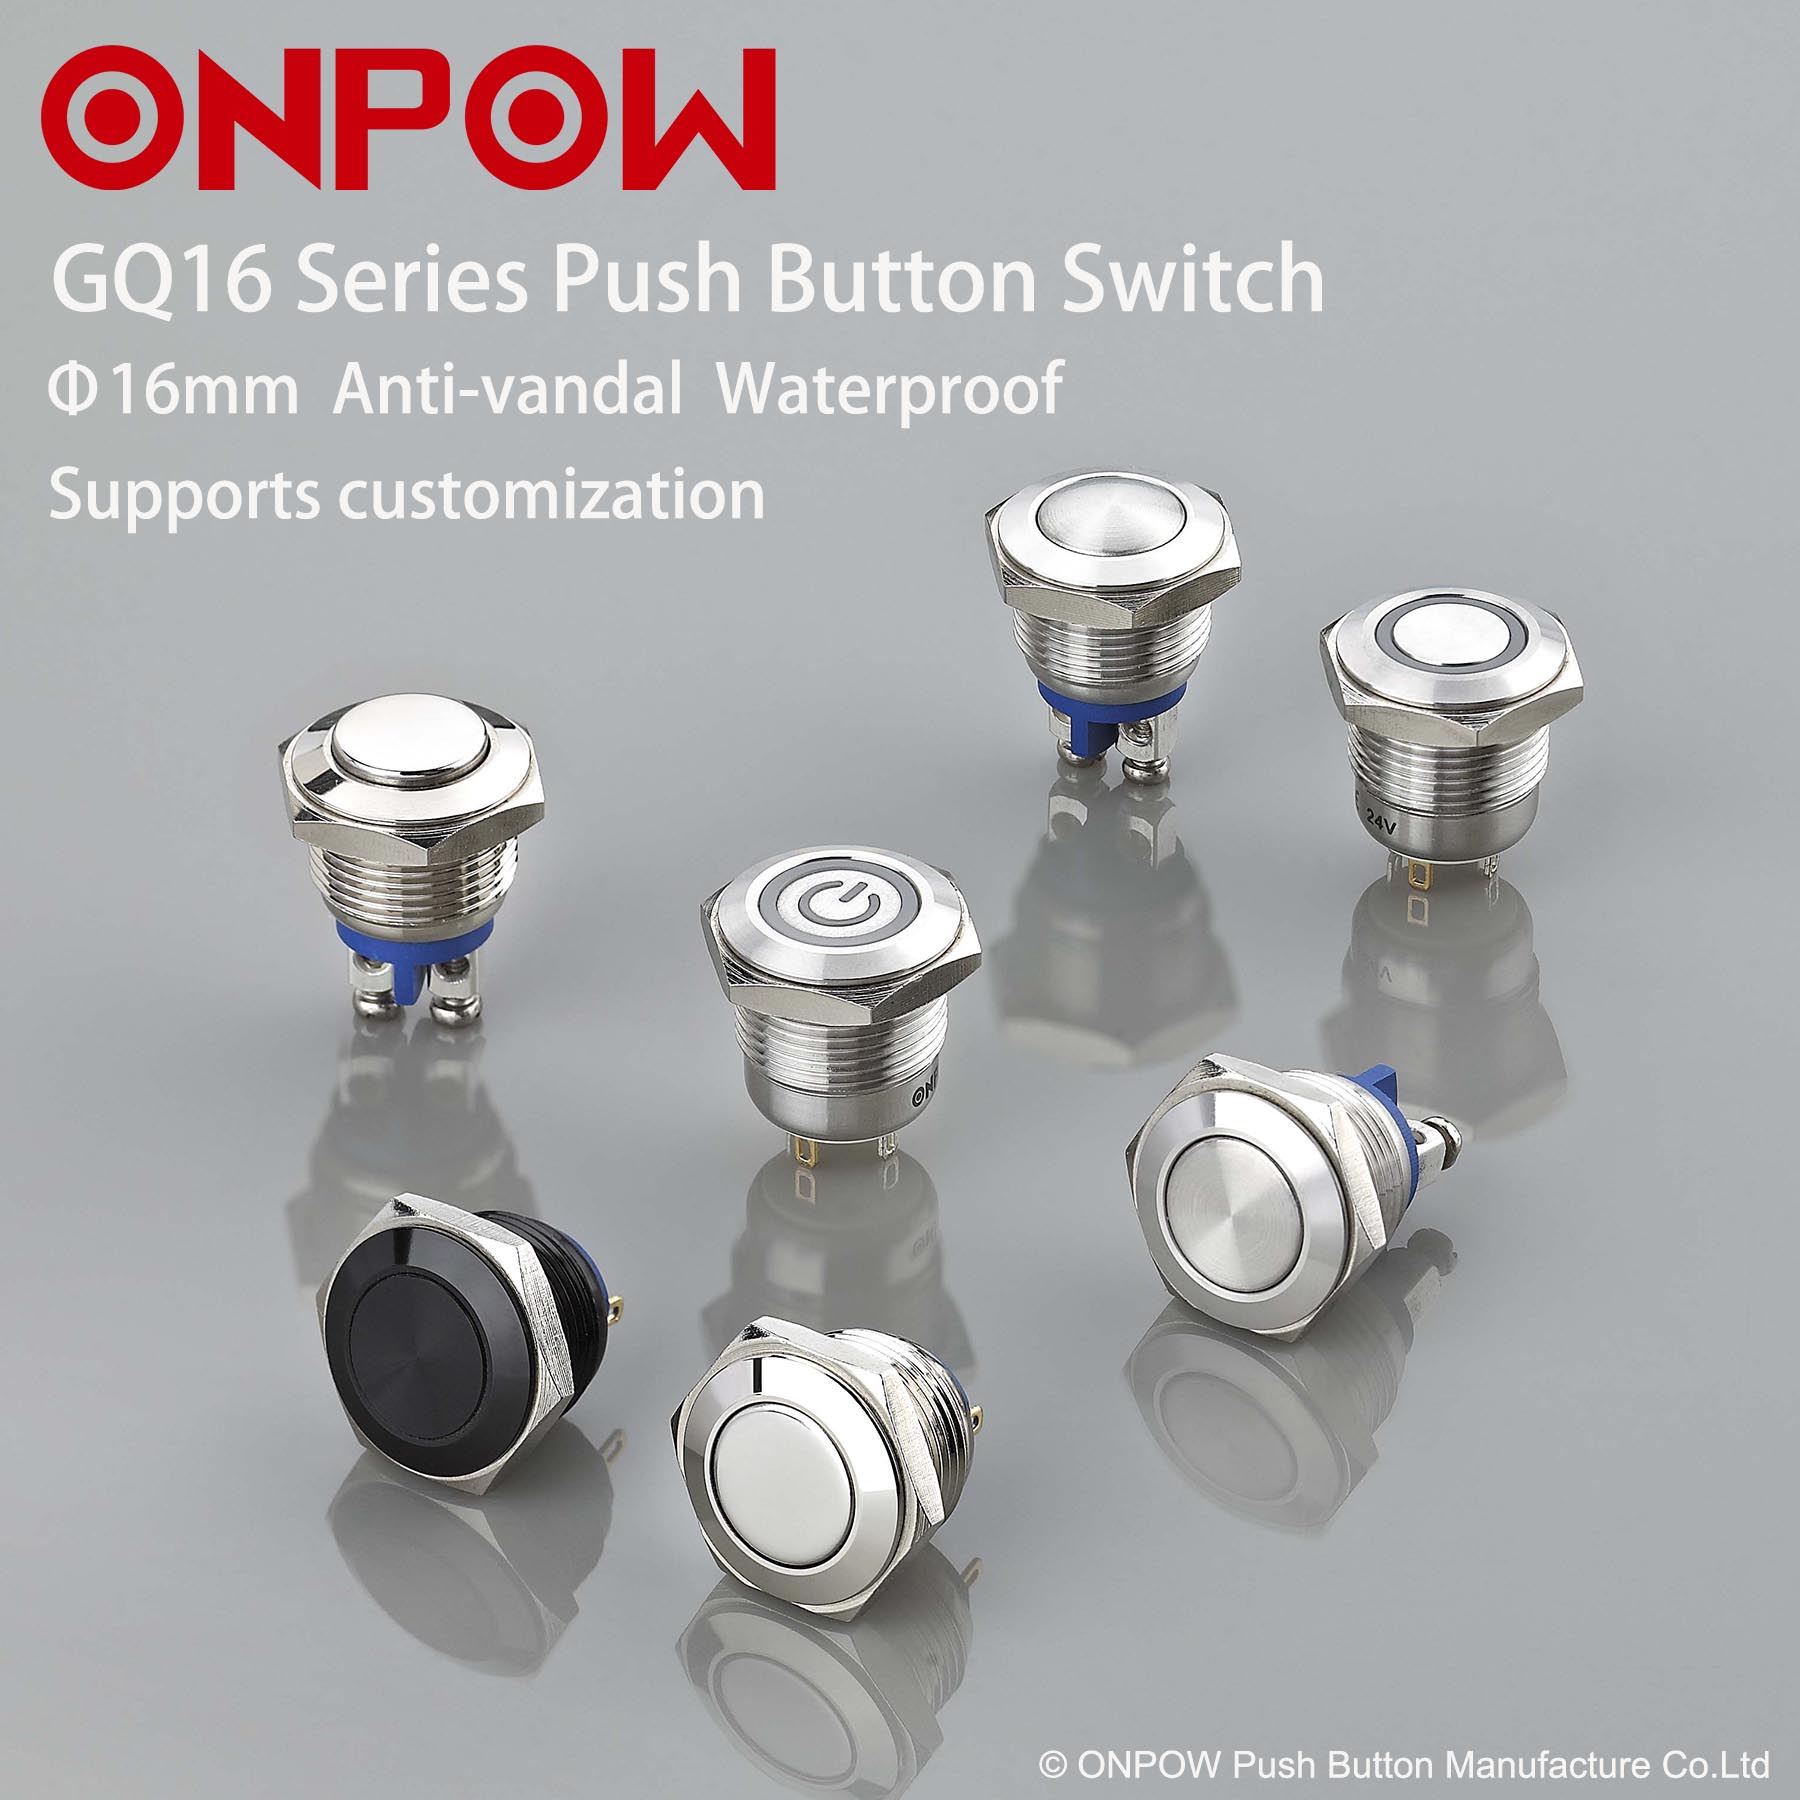 ONPOW’s Mini Marvel: 16mm Metal Push Button Switches Unleashed